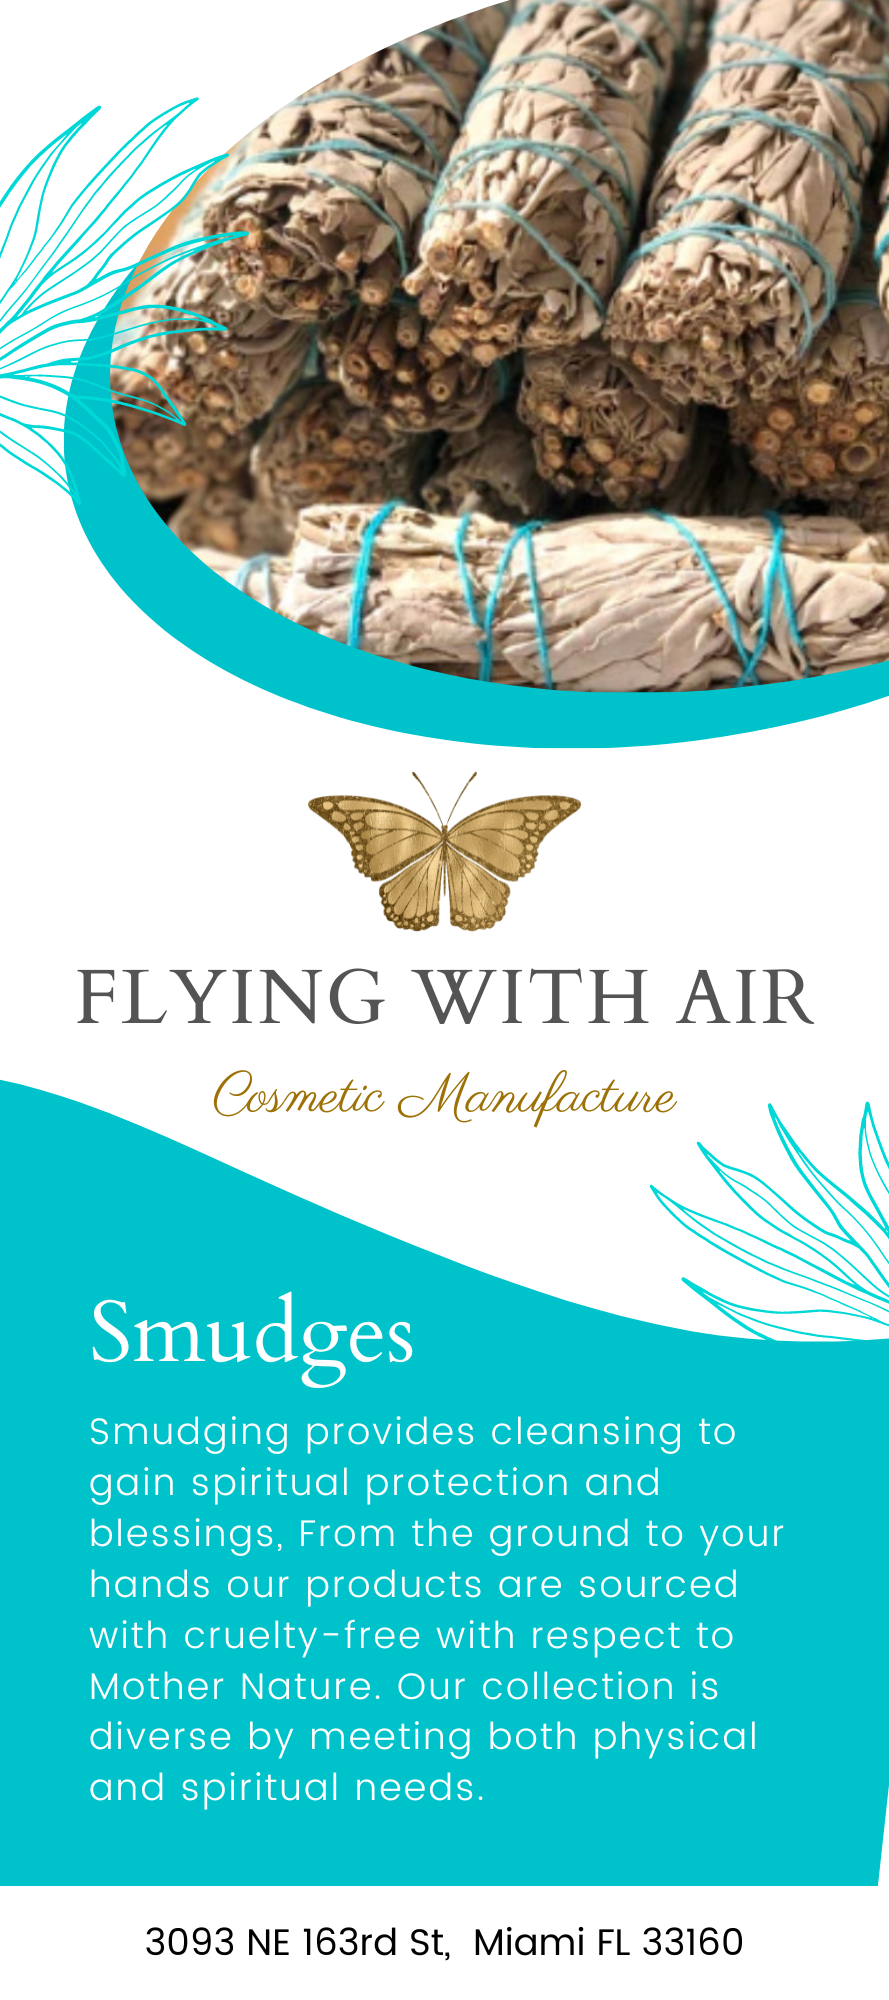 Flying with Air Rack Card Set of 10 - Smudges